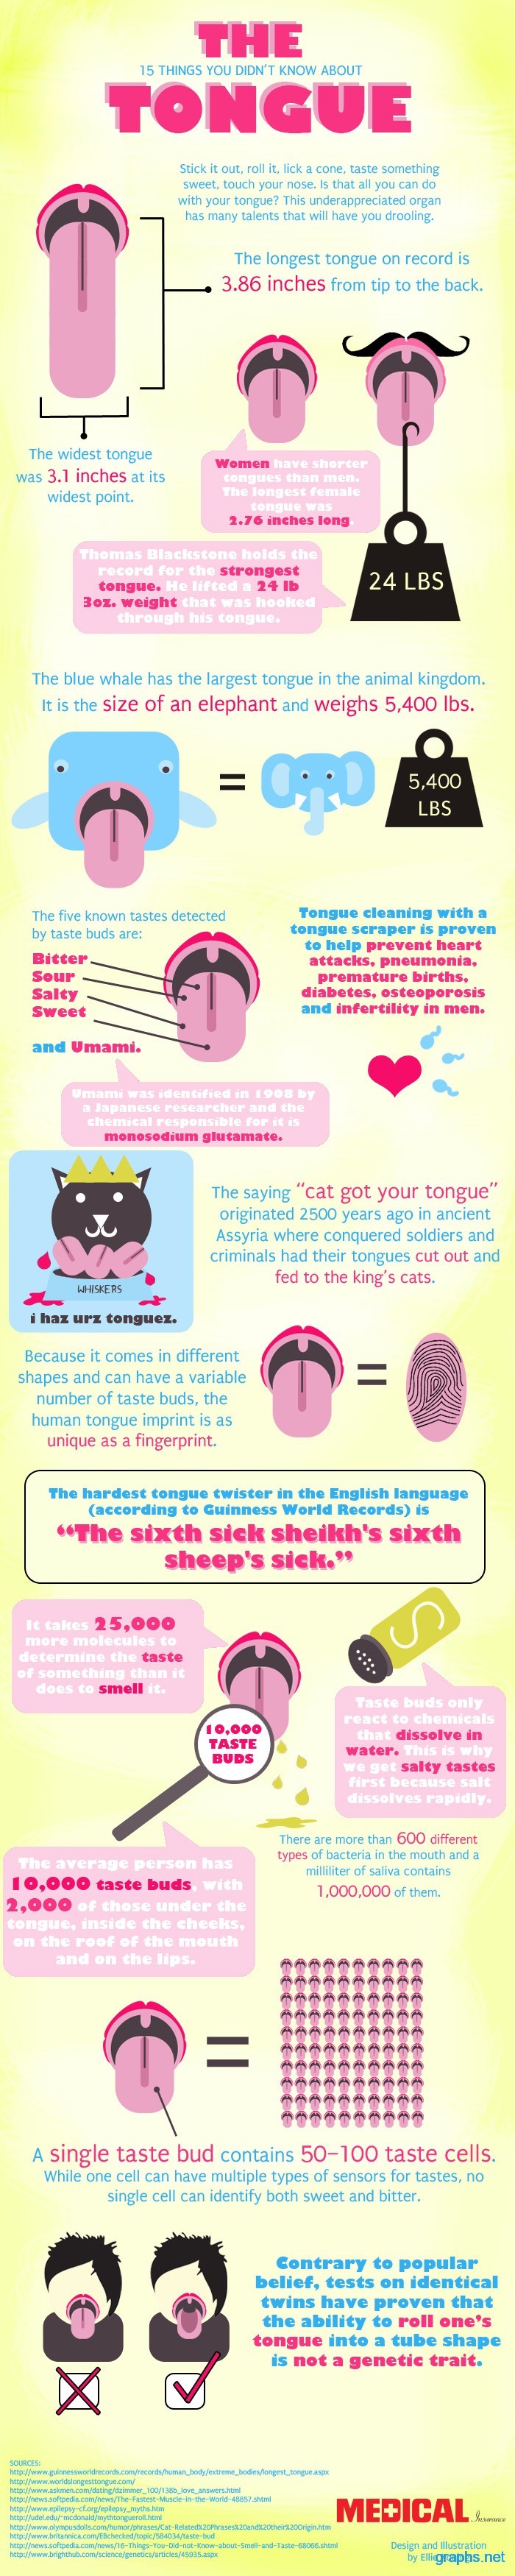 interesting facts about tongue